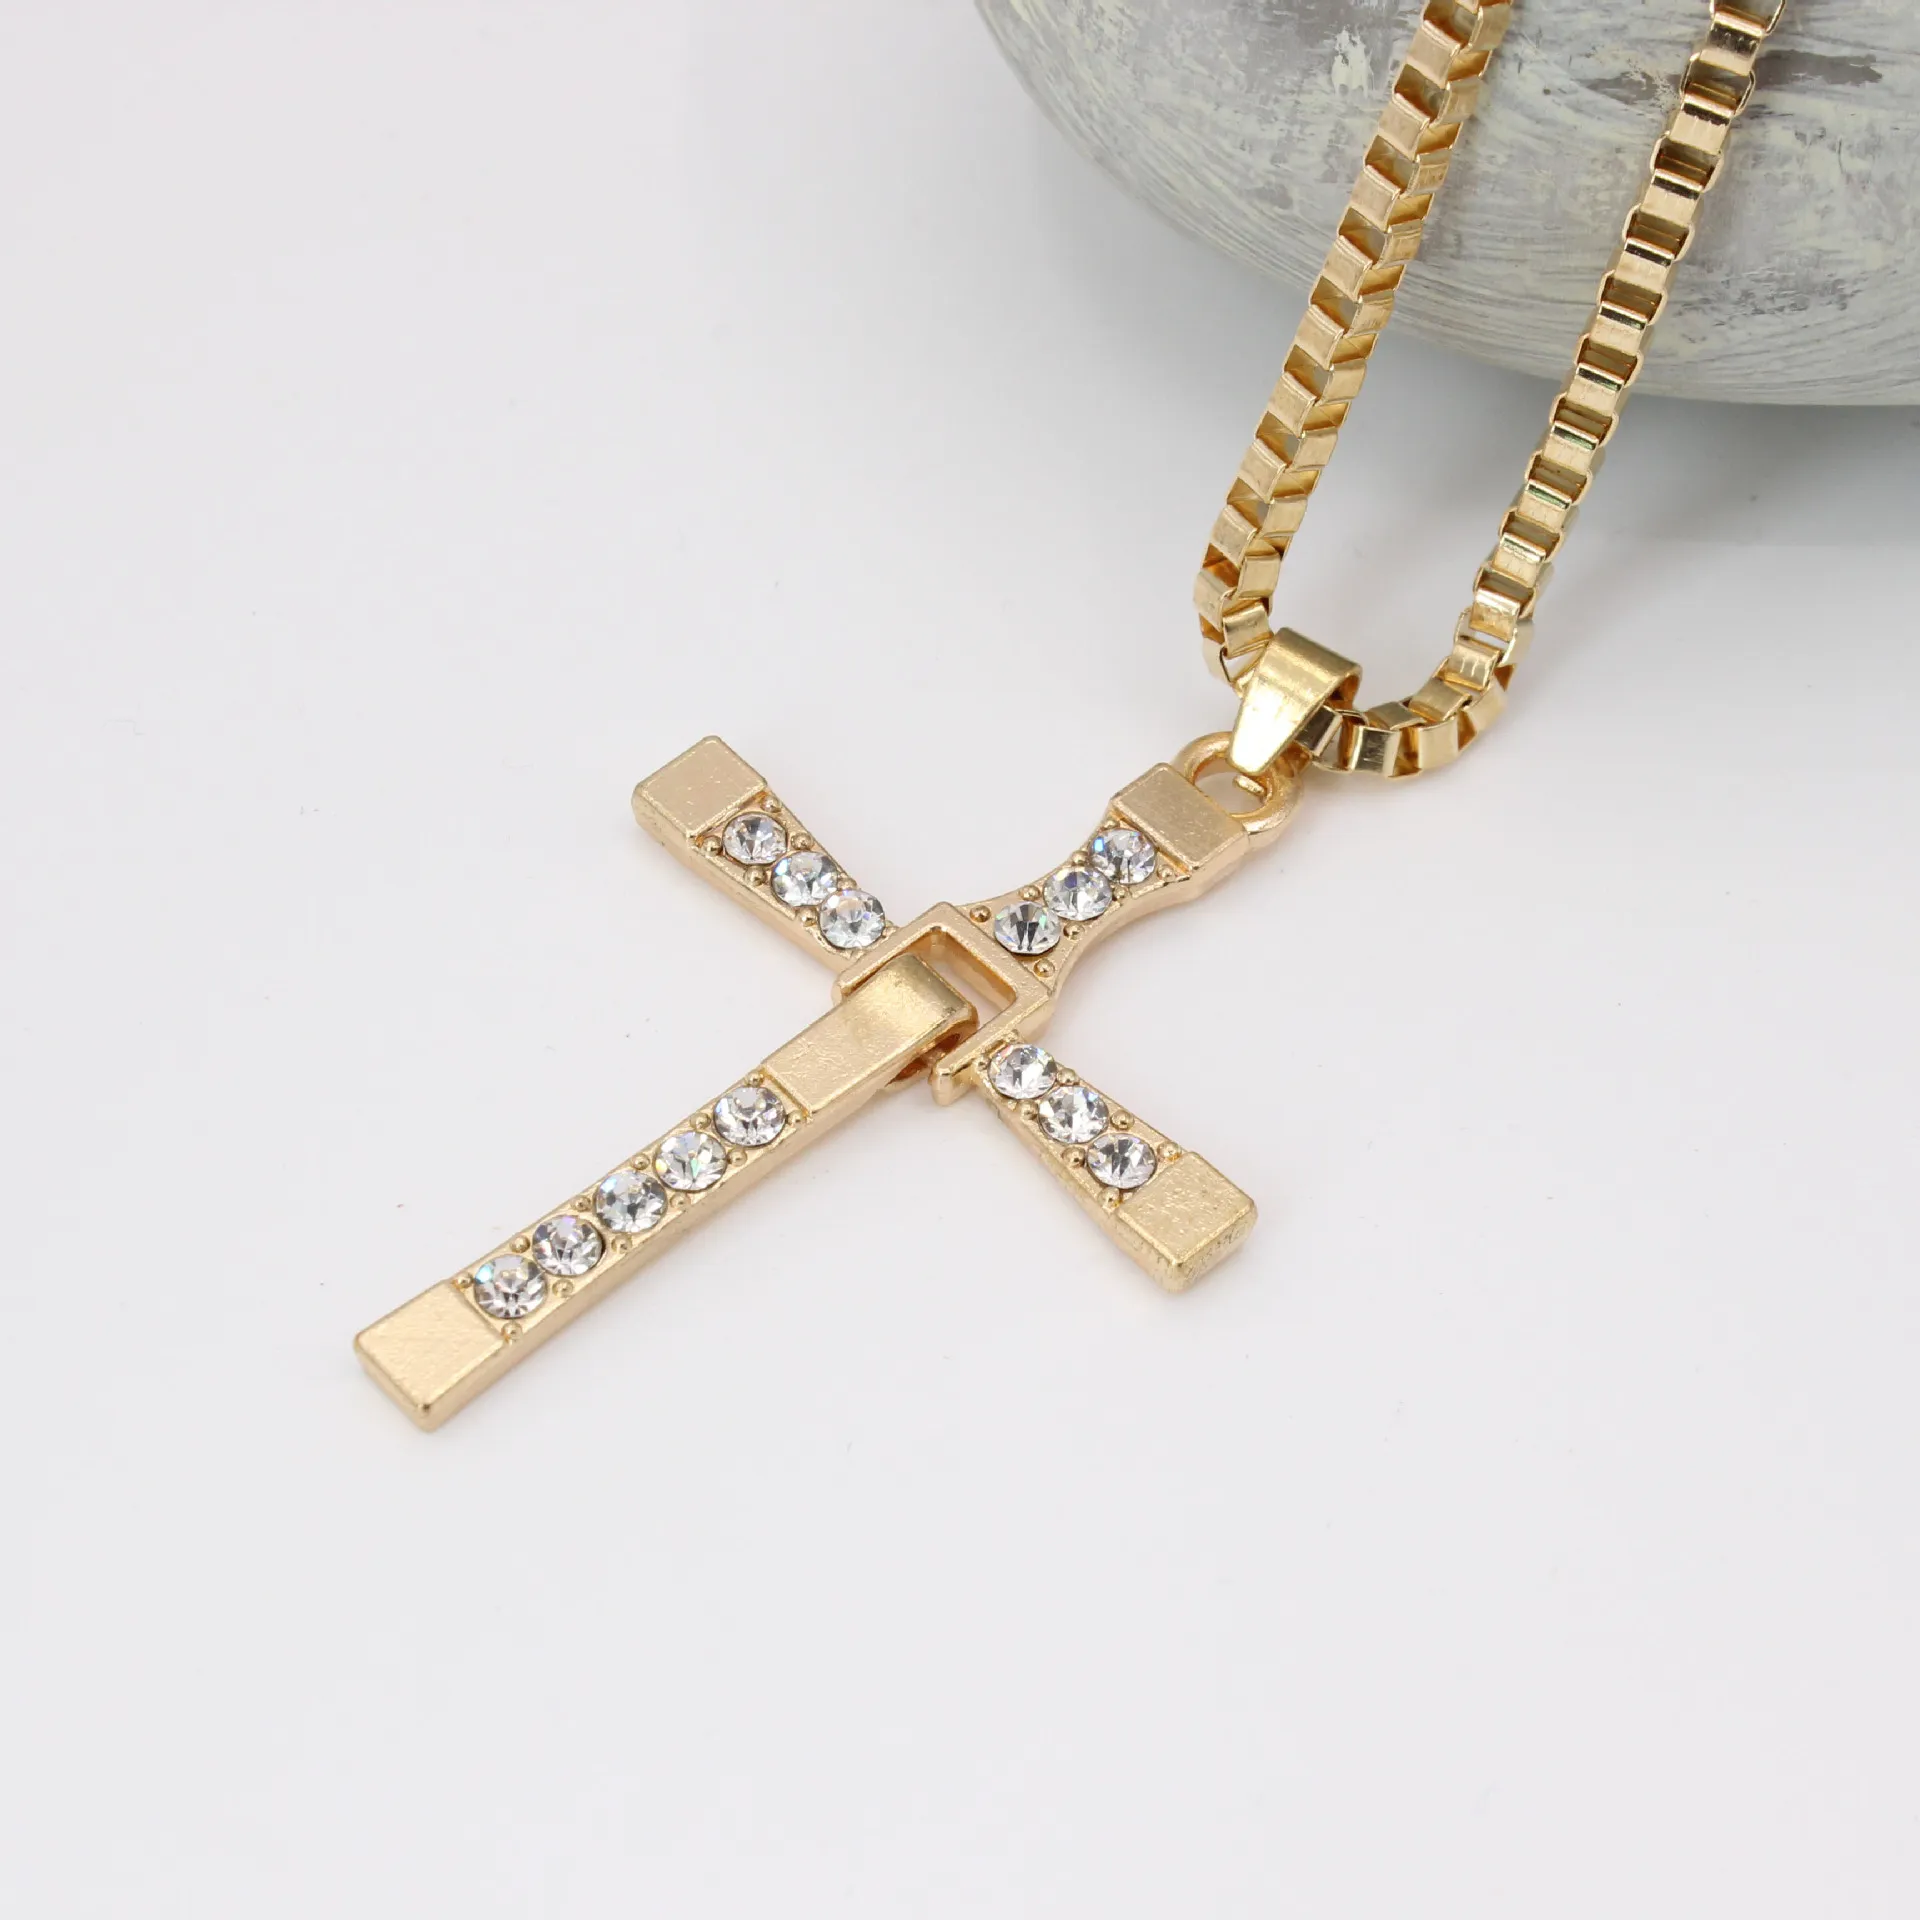 Fast And Furious Necklacespendants Movie Jewelry Classic Rhinestone Pendant Sliver Cross Necklaces Pendants For Men Rxltx Jgn31